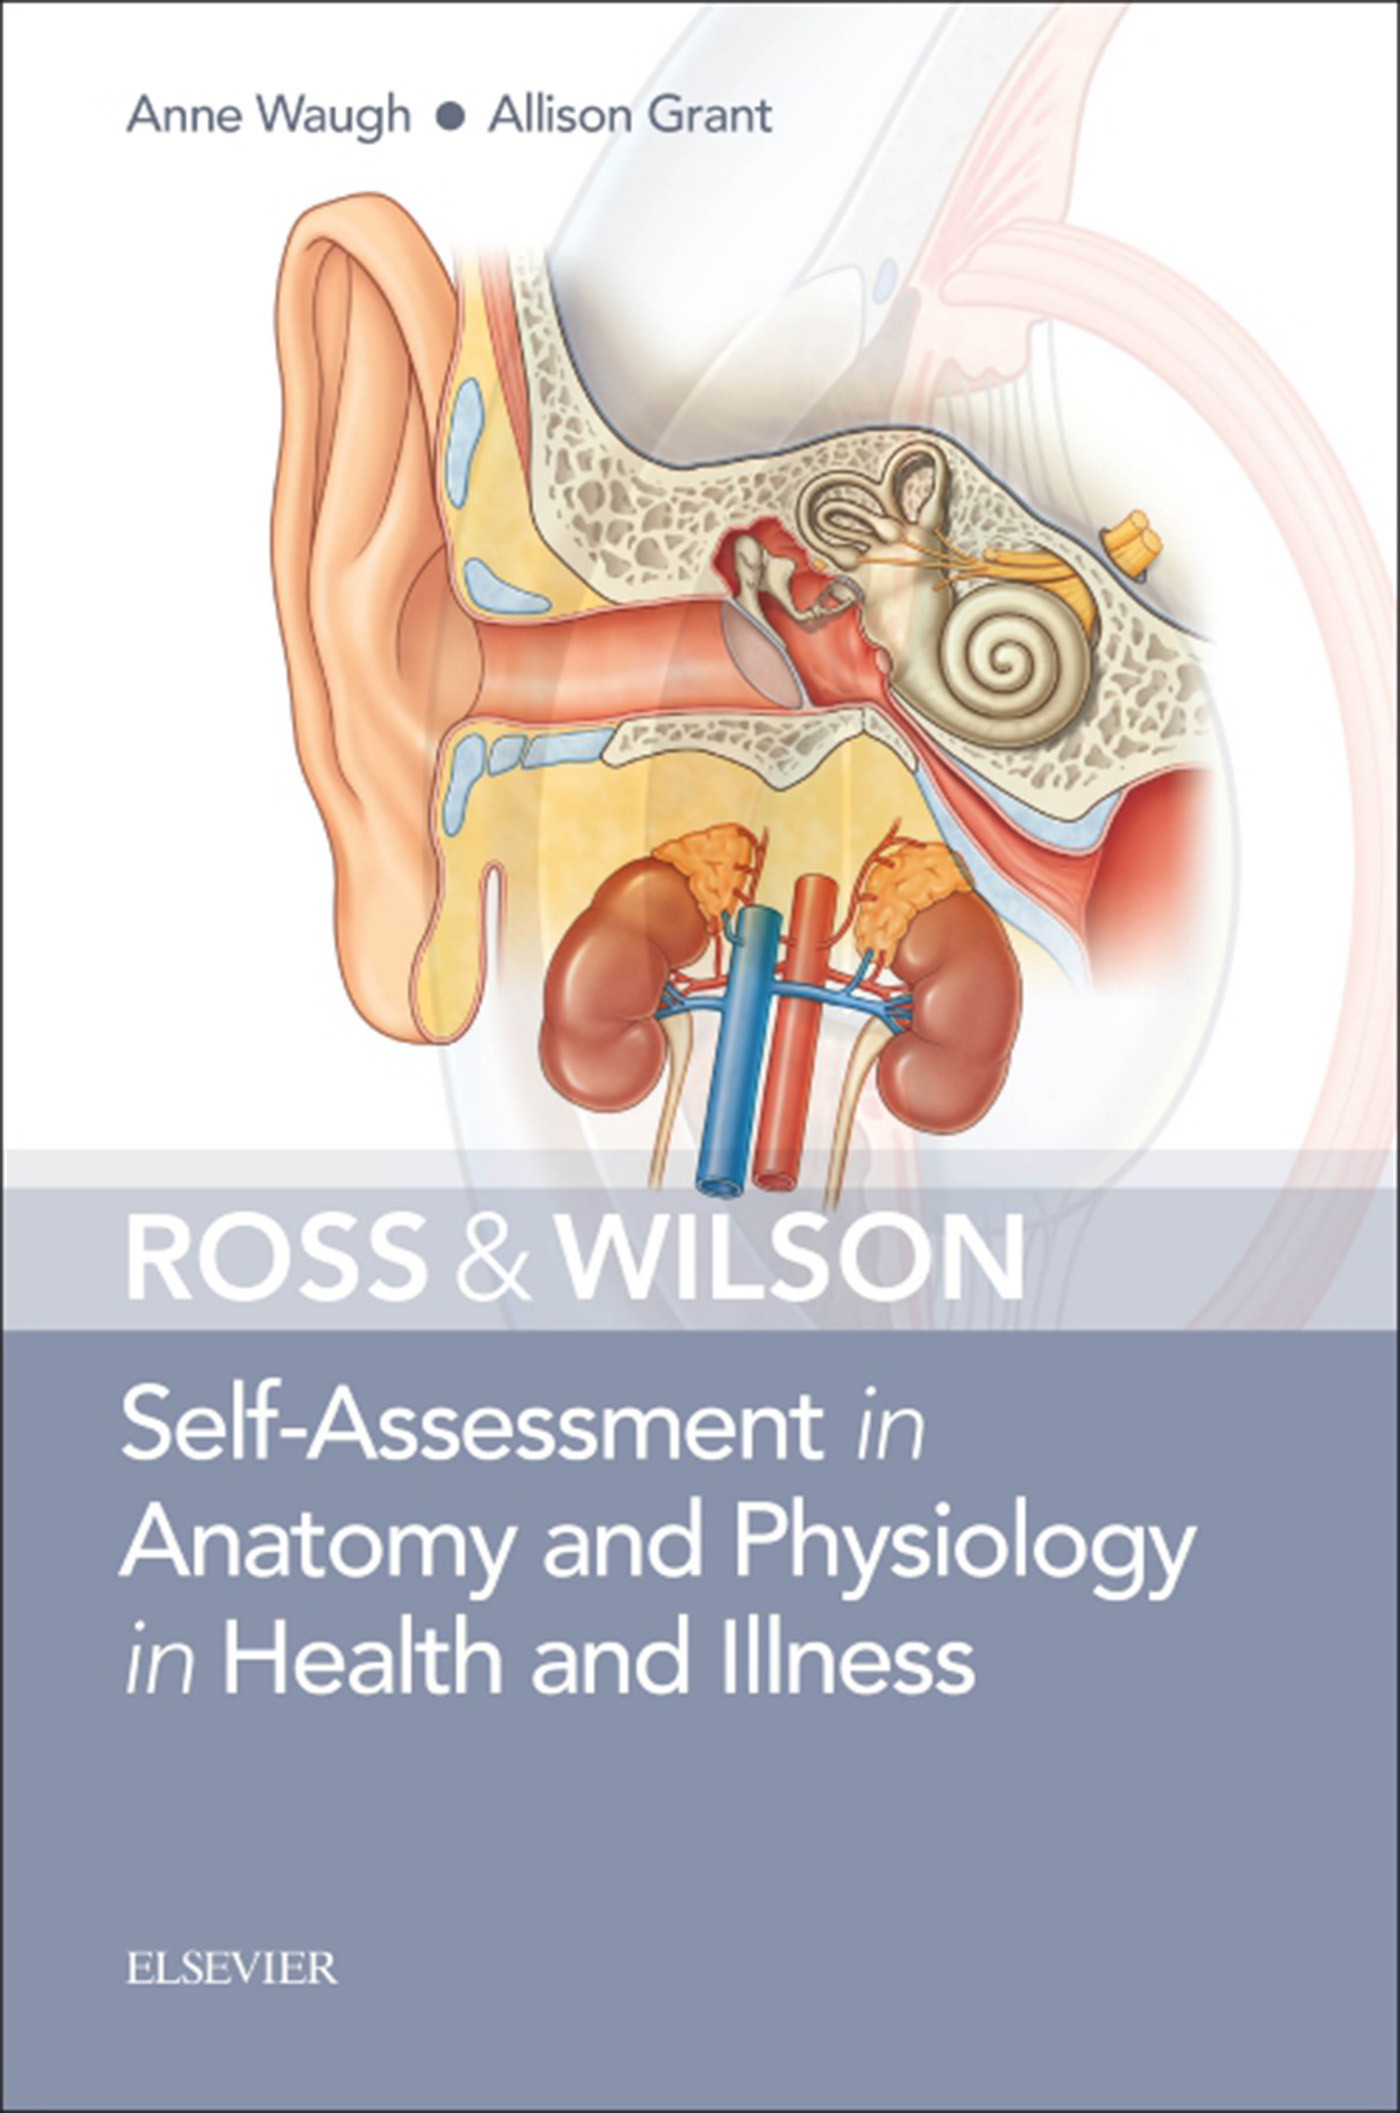 Ross And Wilson Self Assessment In Anatomy And Physiology In Health And Illness E Book E Book